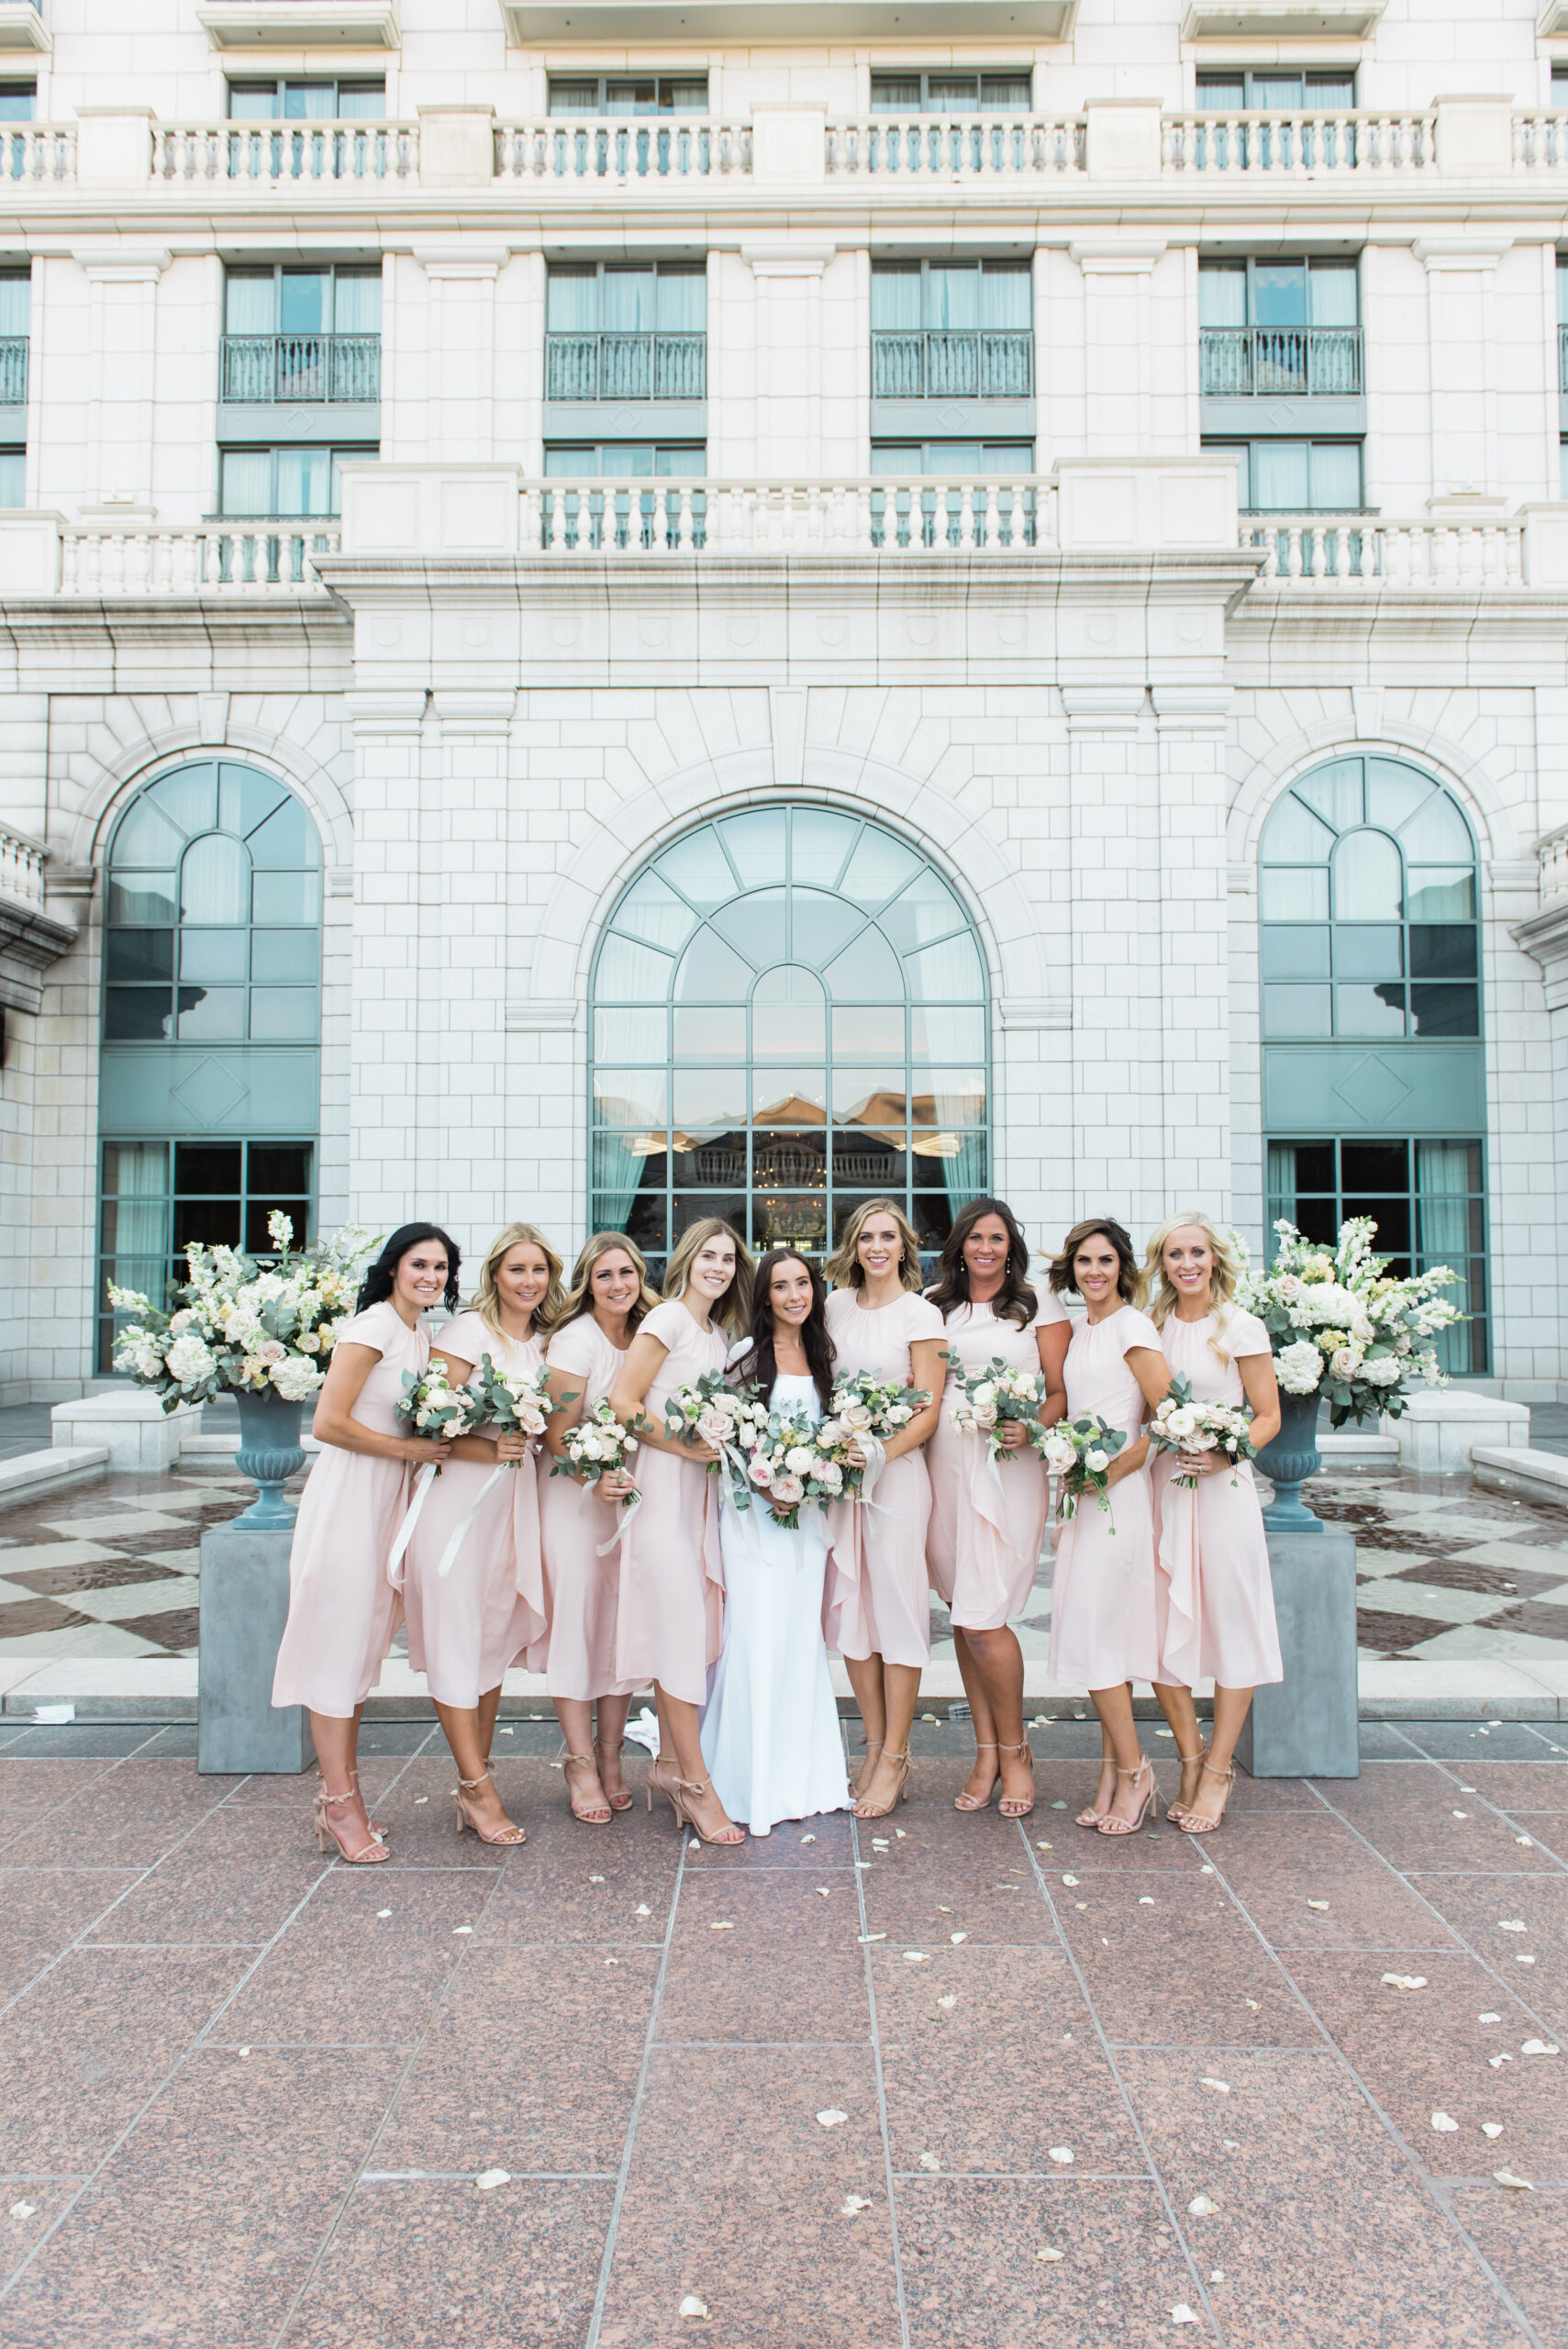 Bride and bridesmaids in pink dresses and nude heels